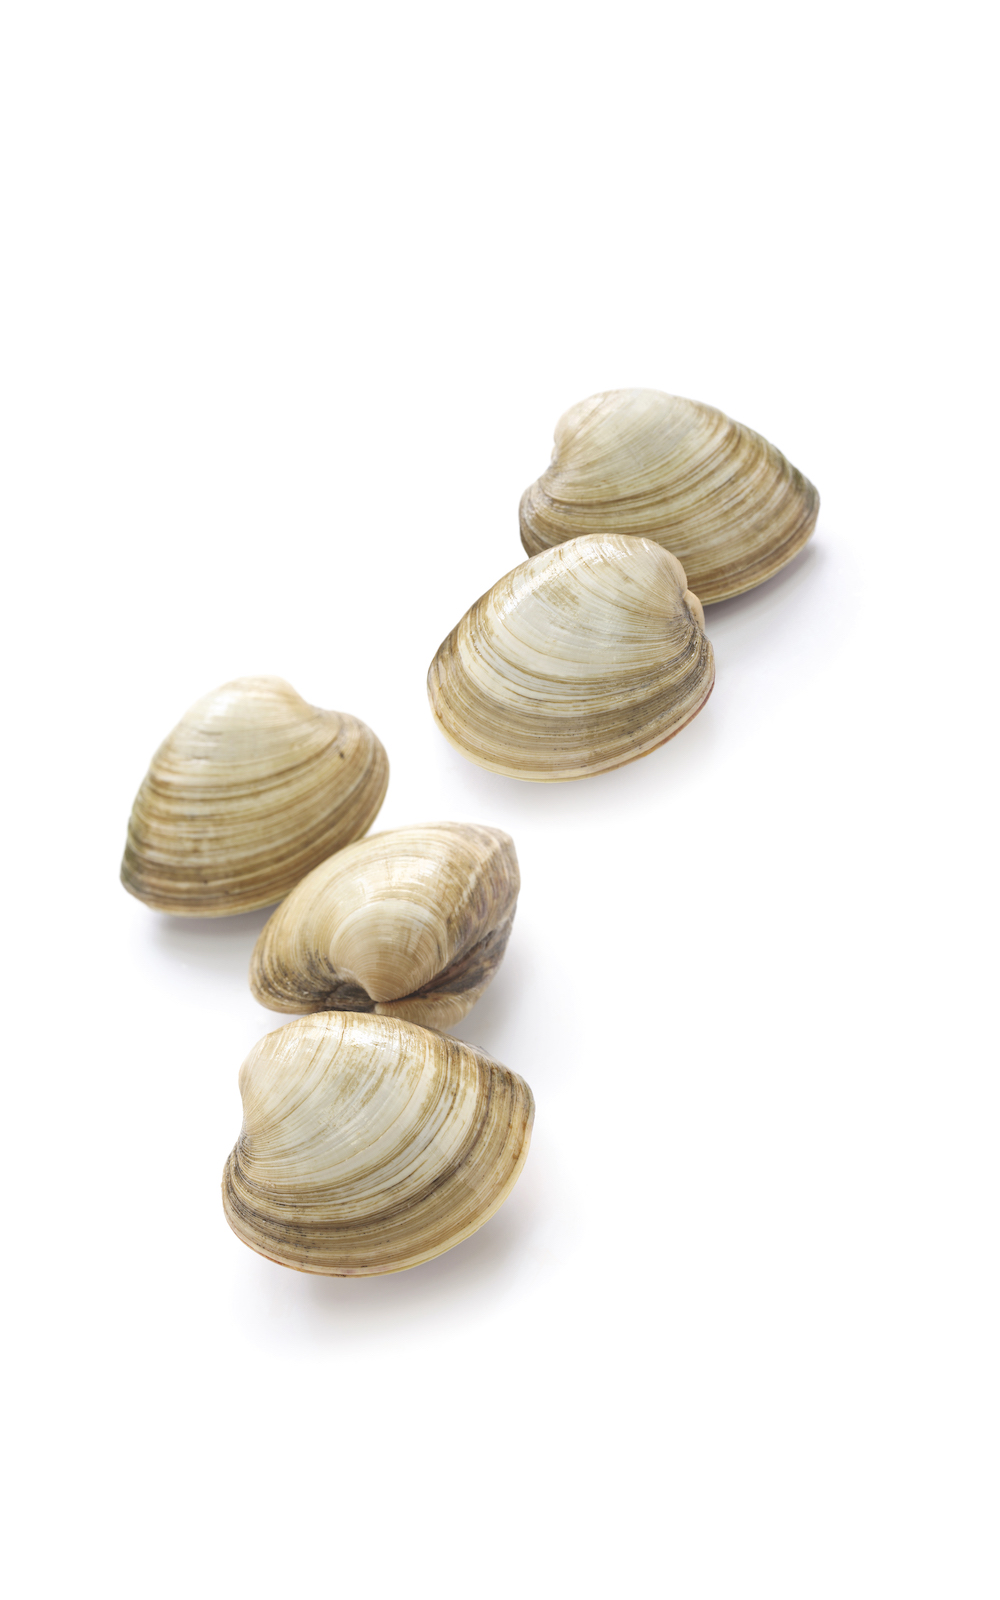 Image of several clams